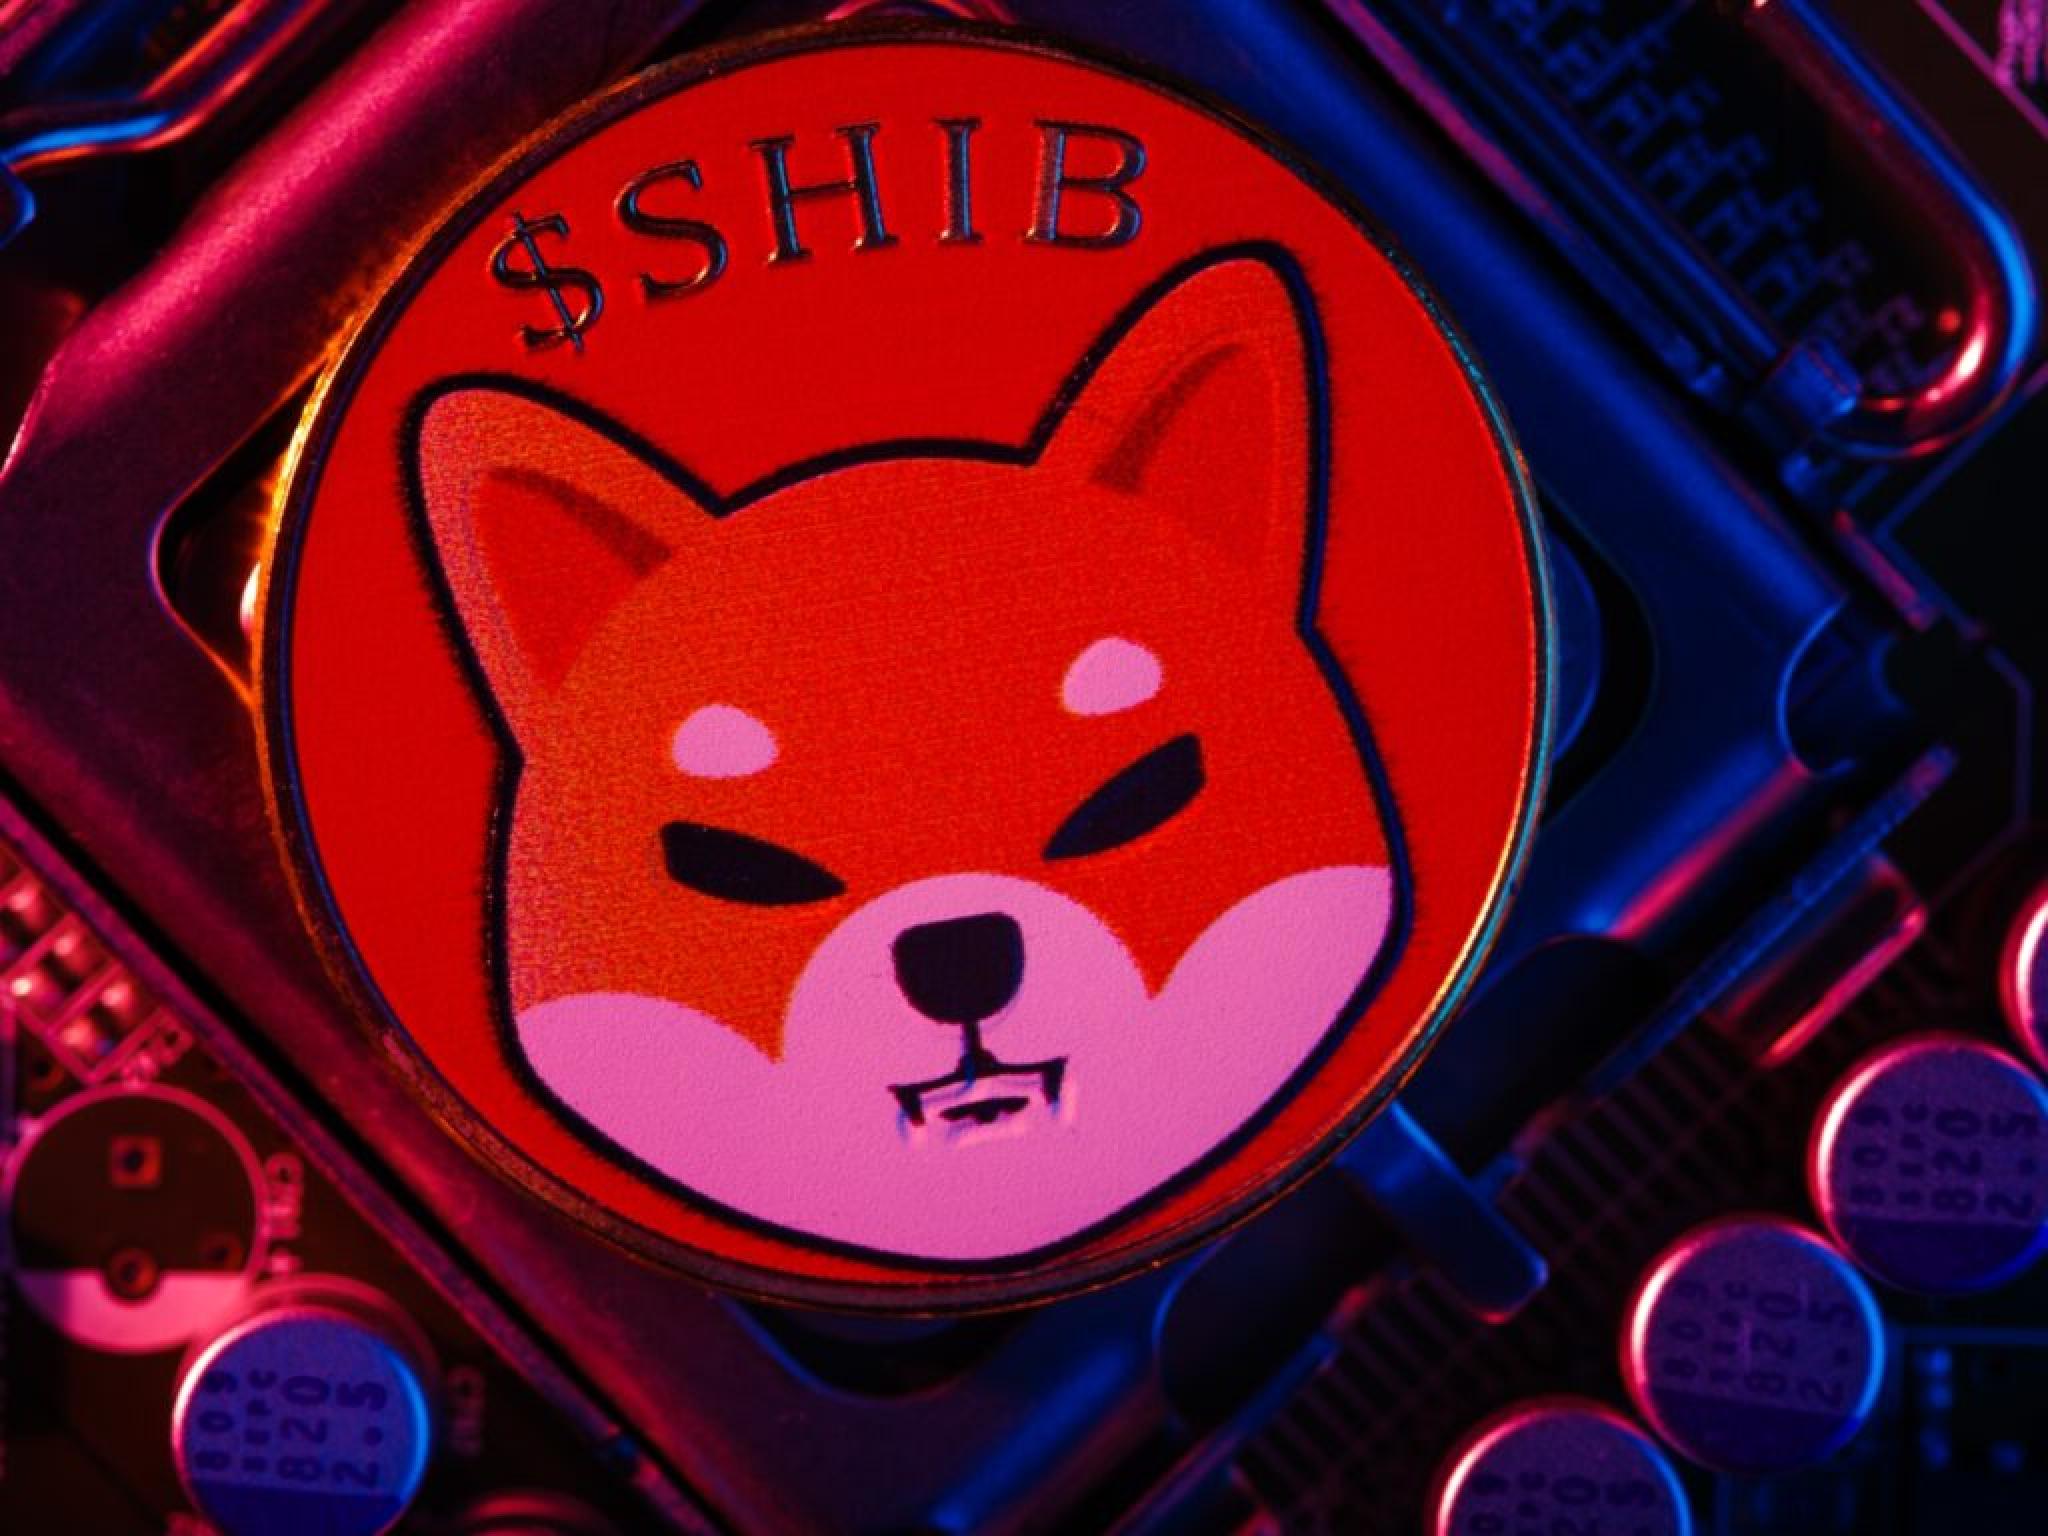  dogecoin-killer-shiba-inu-sees-1600-rise-in-burn-rate--88m-tokens-sent-to-dead-wallet-in-a-single-day 